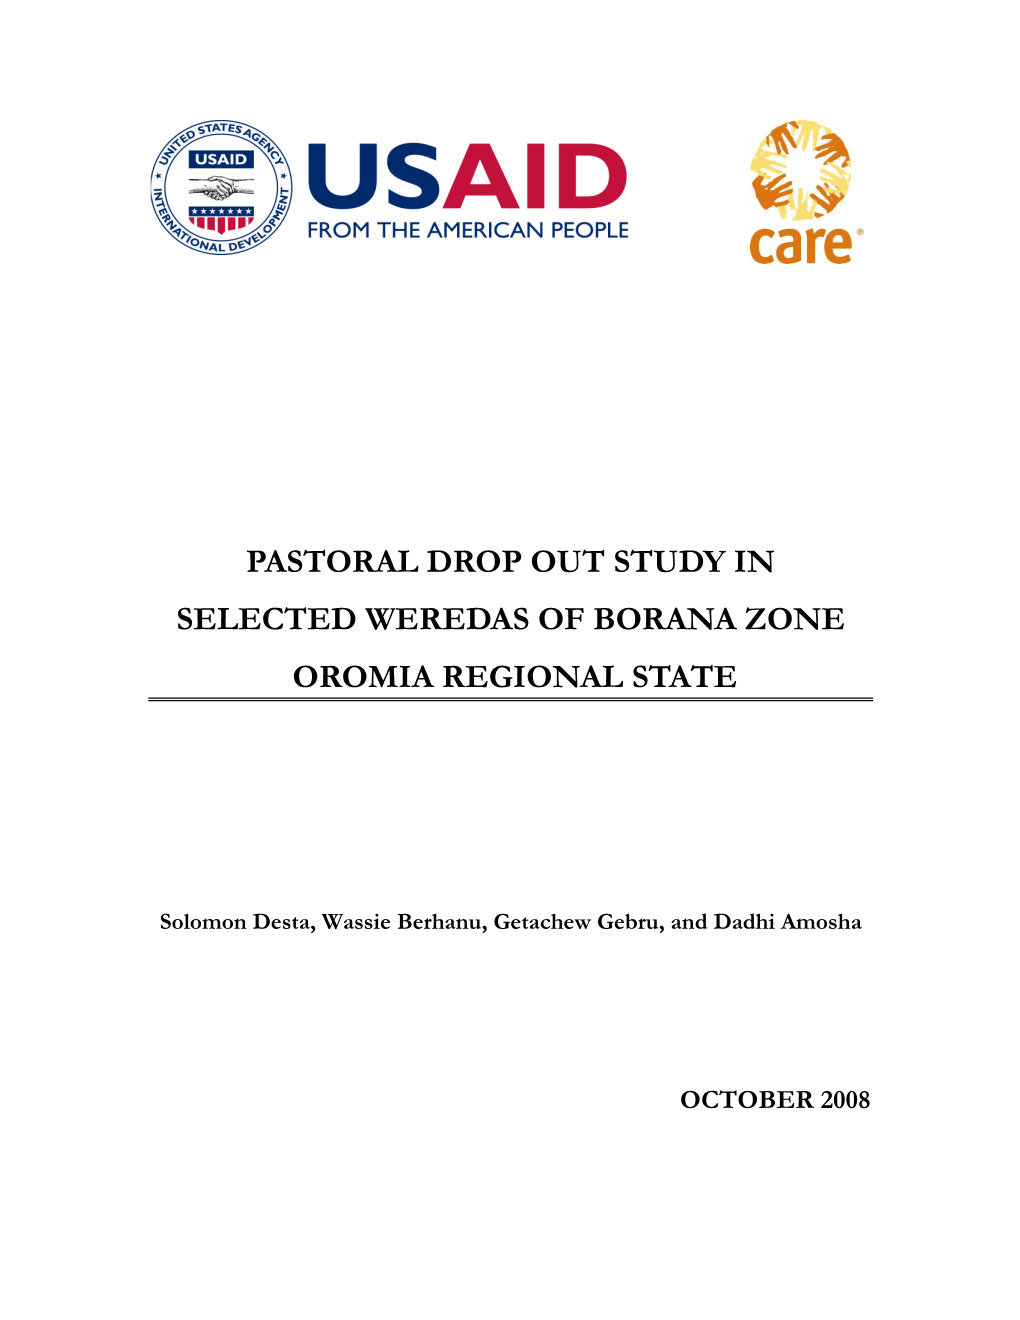 Pastoral Drop out Study in Selected Weredas of Borana Zone Oromia Regional State